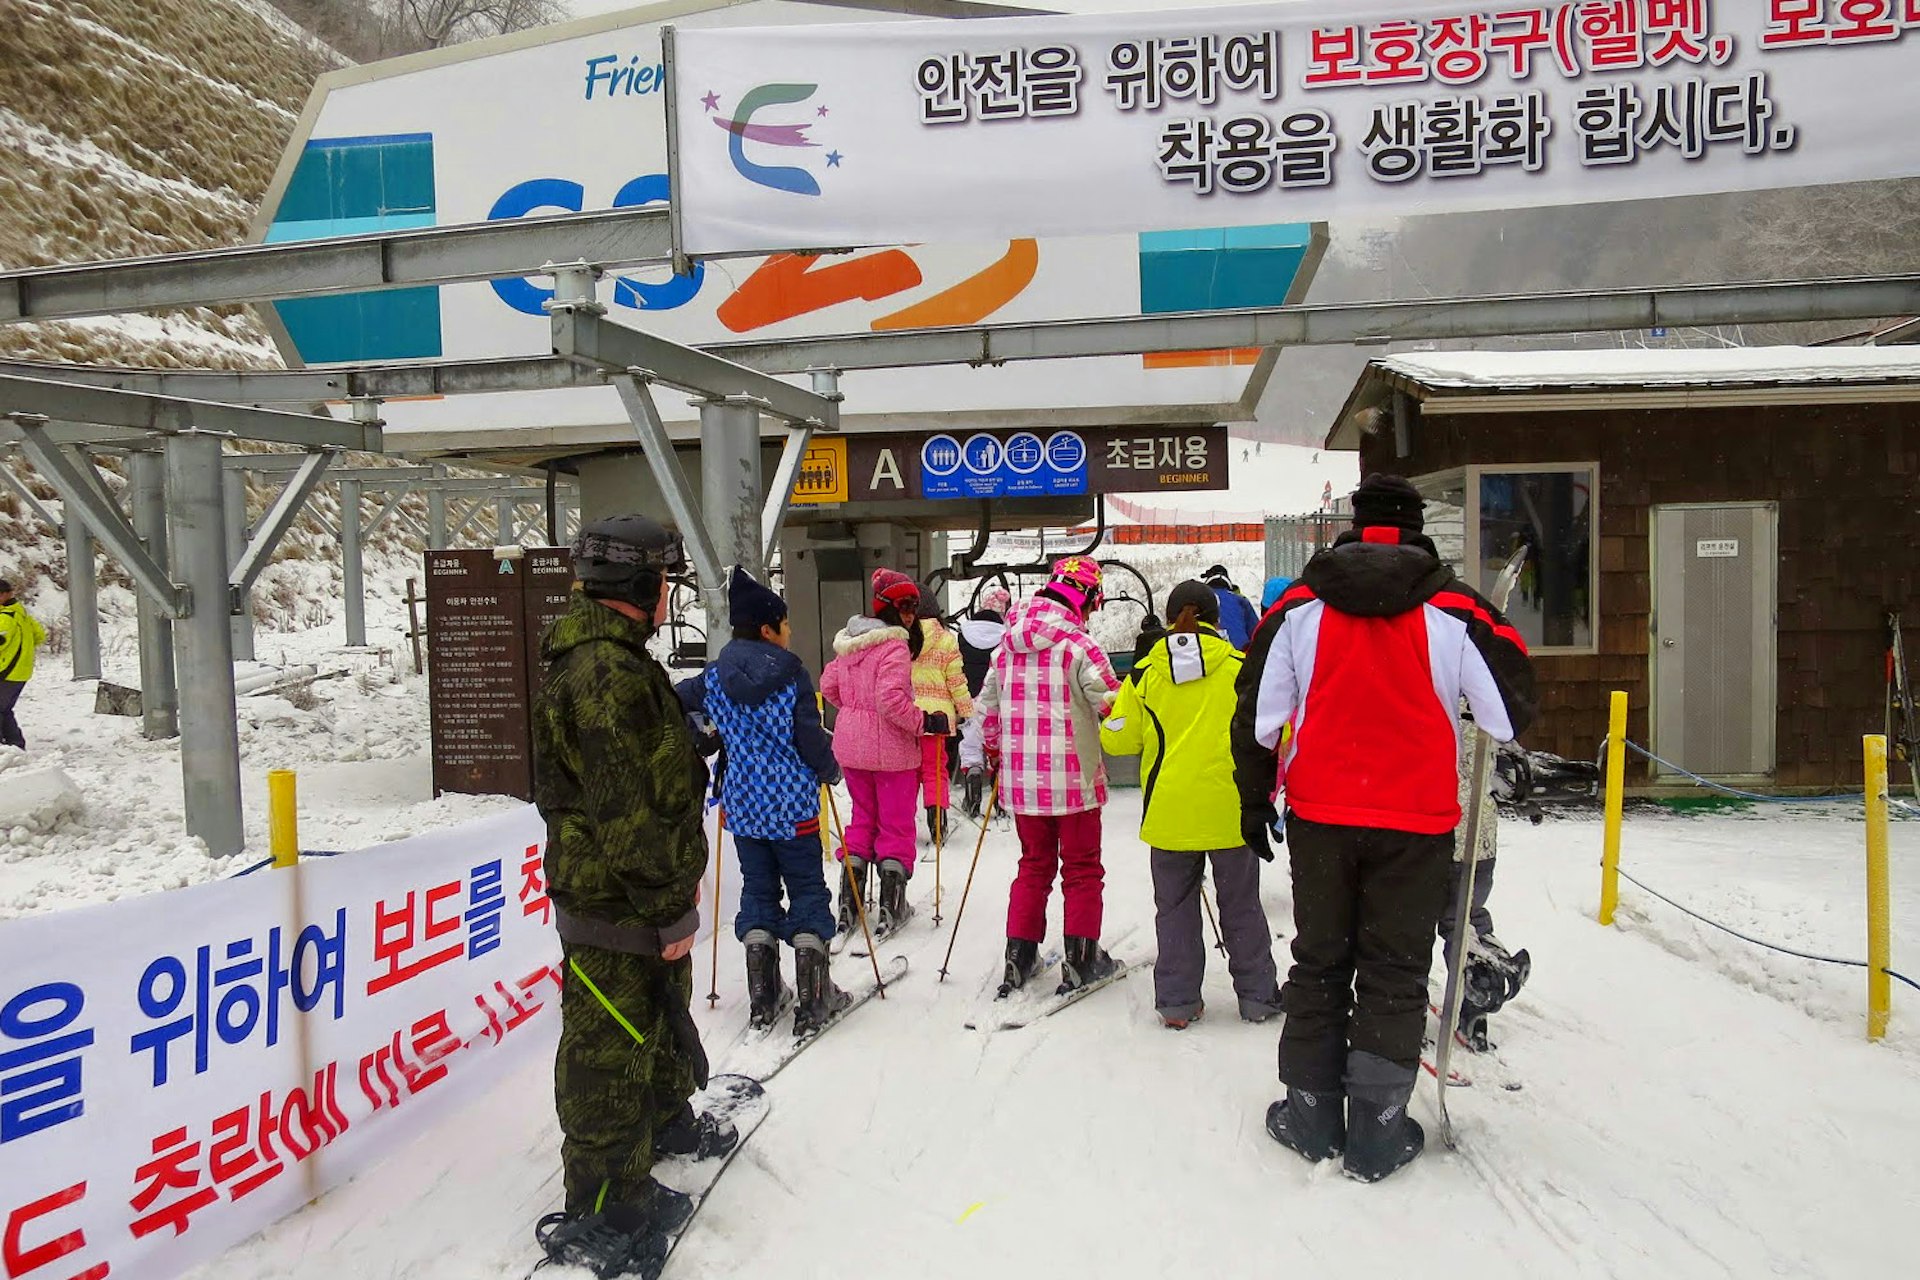 Elysian Gangchon, the only ski resort on the Seoul subway system. Image by Megan Eaves / Lonely Planet